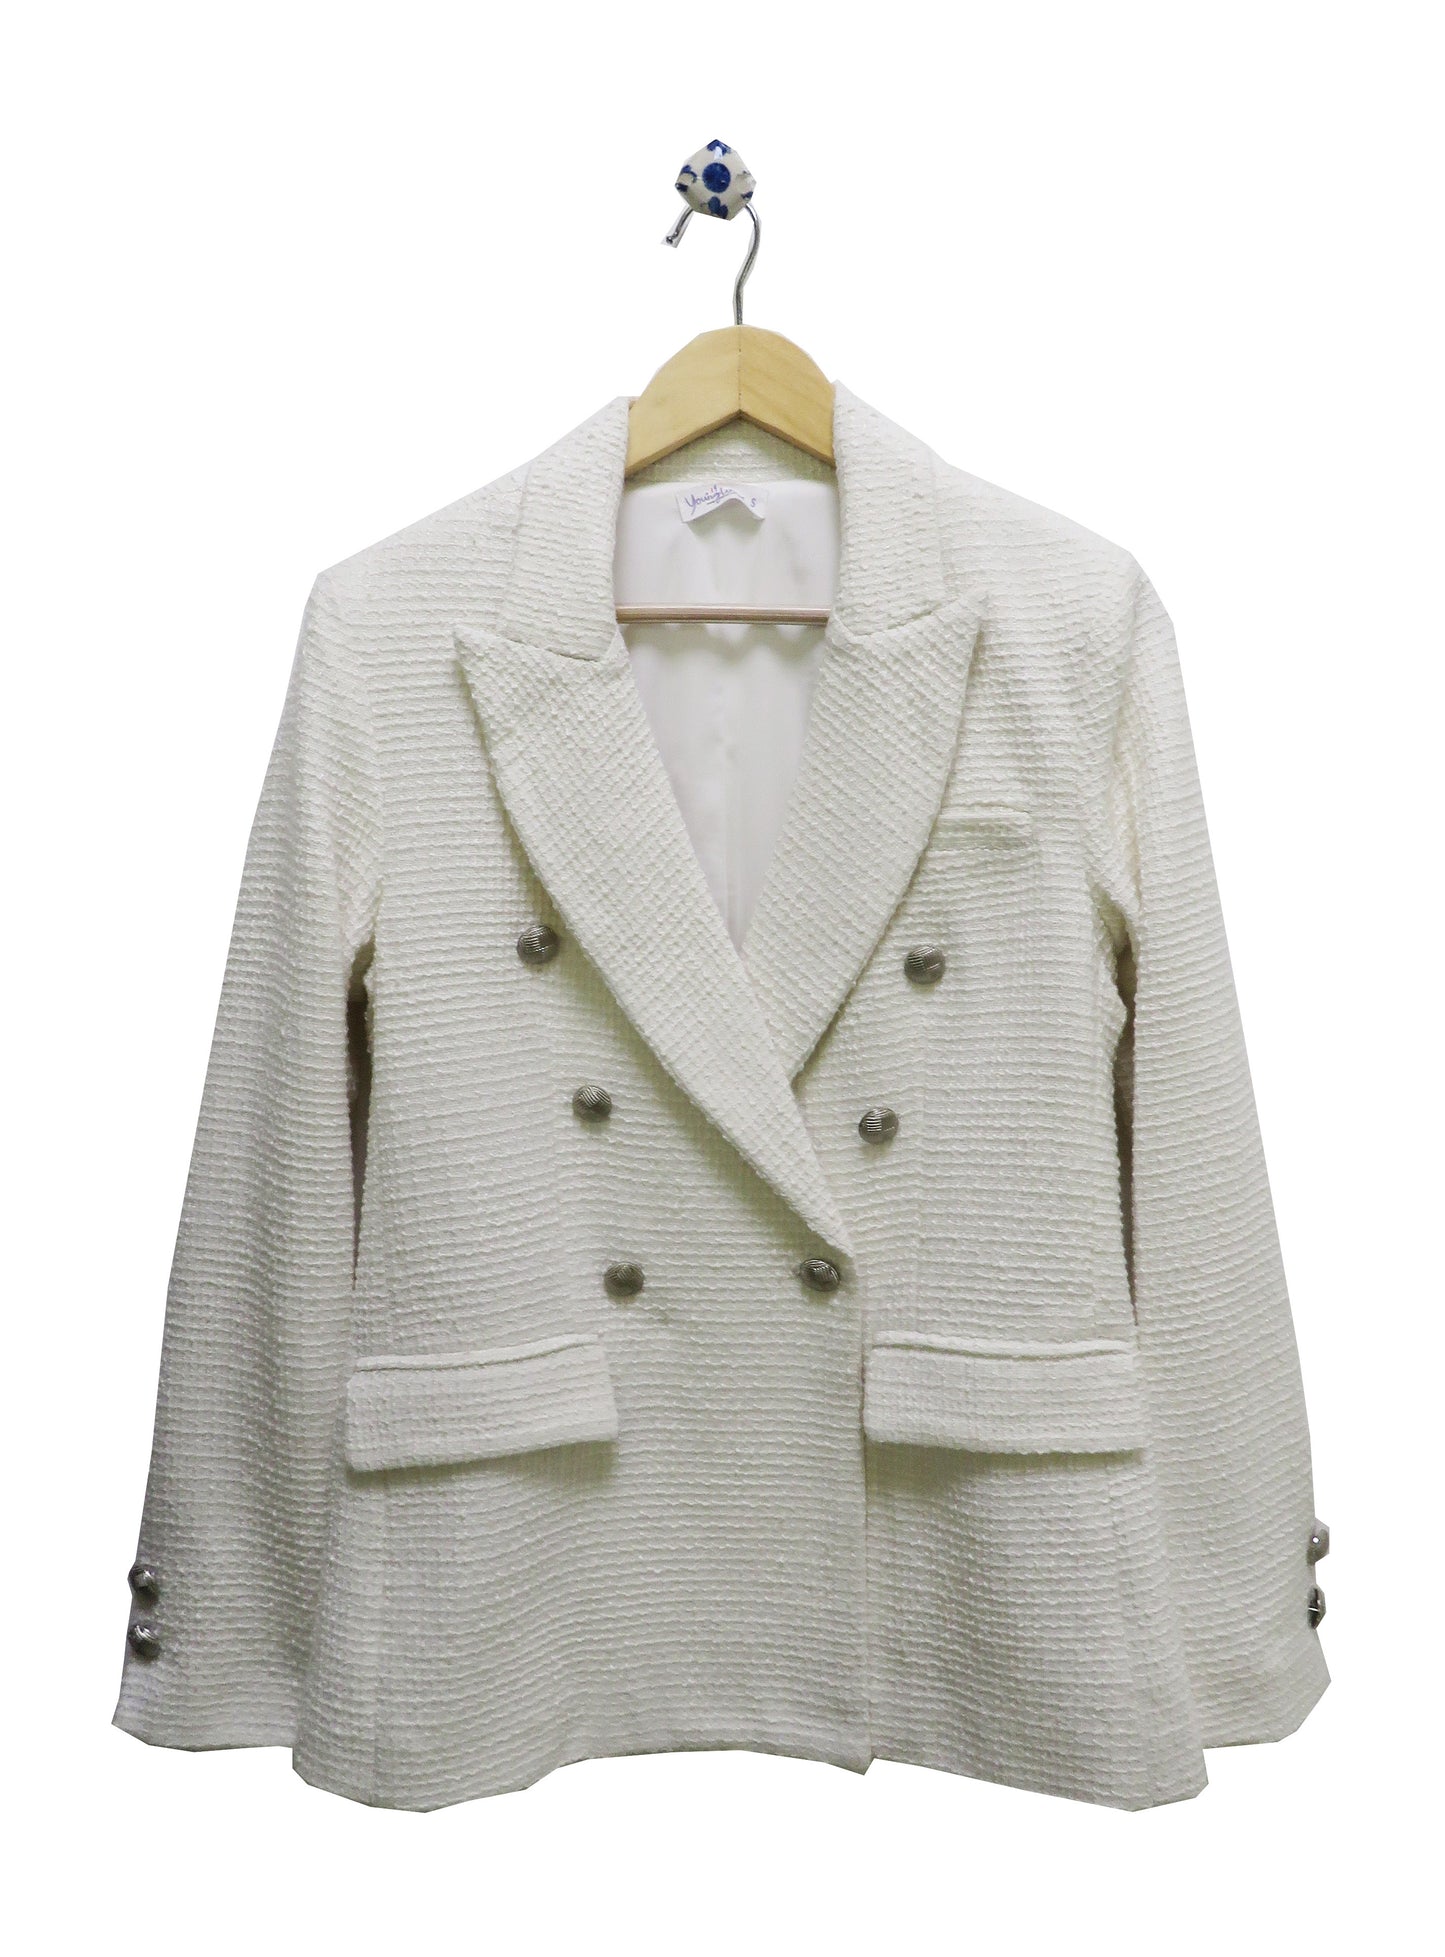 WHITE TWEED BLAZER  WITH SILVER  BUTTONS